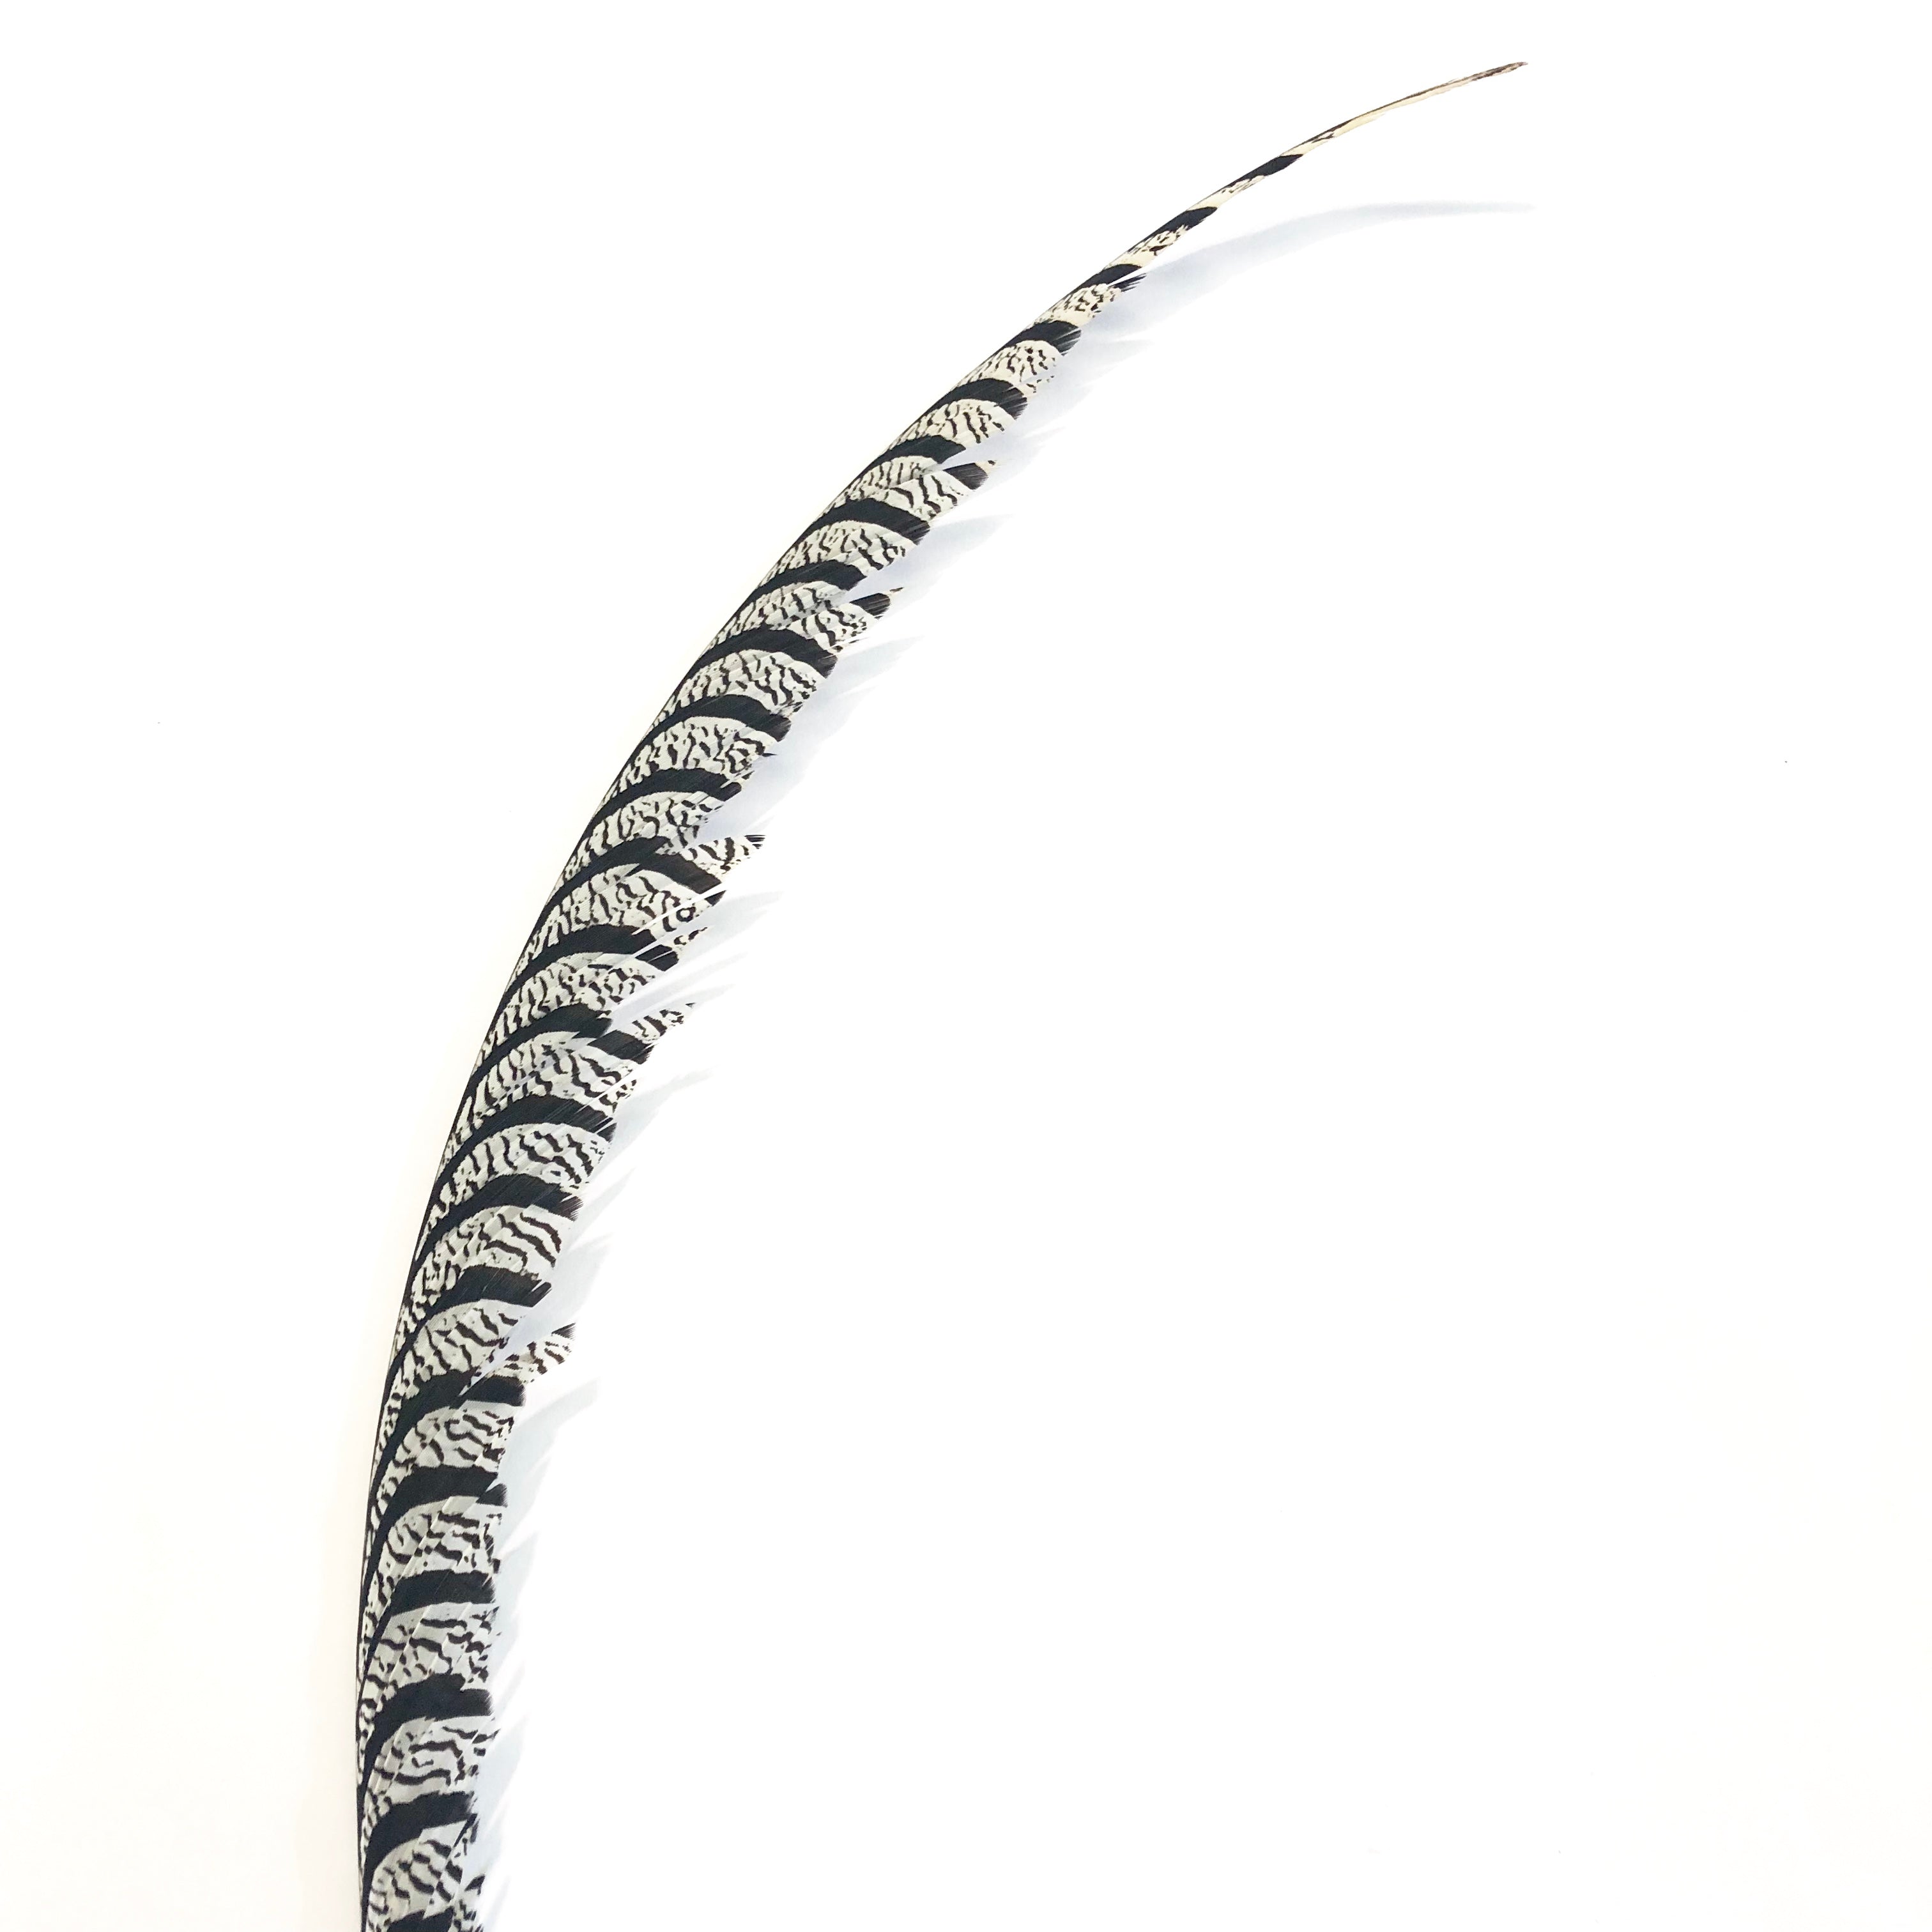 Lady Amherst Pheasant Centre Tail Feather - Natural ((SECONDS))